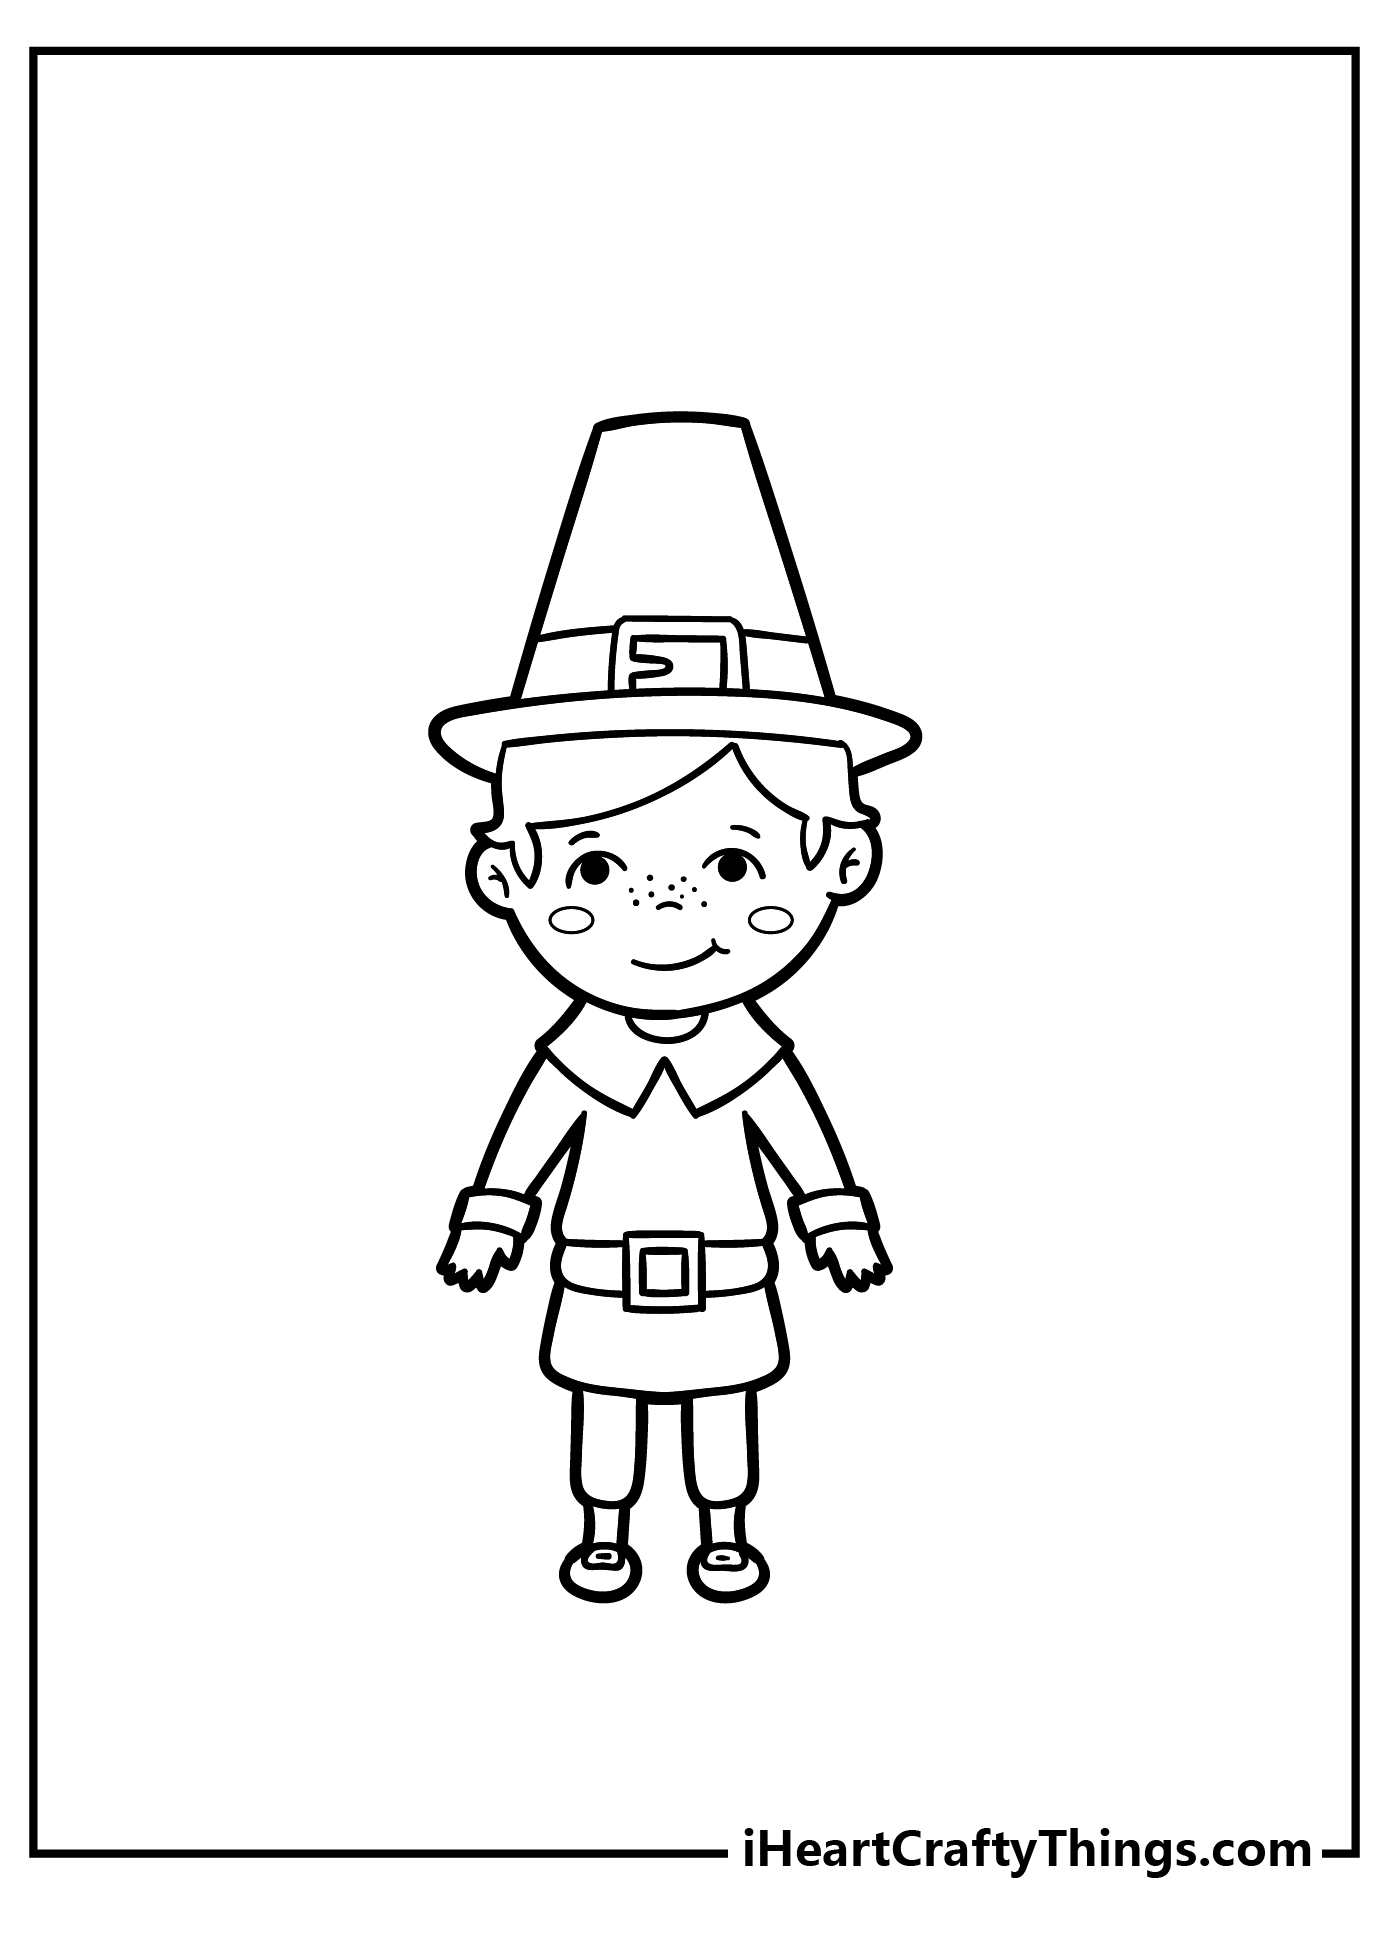 Pilgrim Coloring Book for adults free download